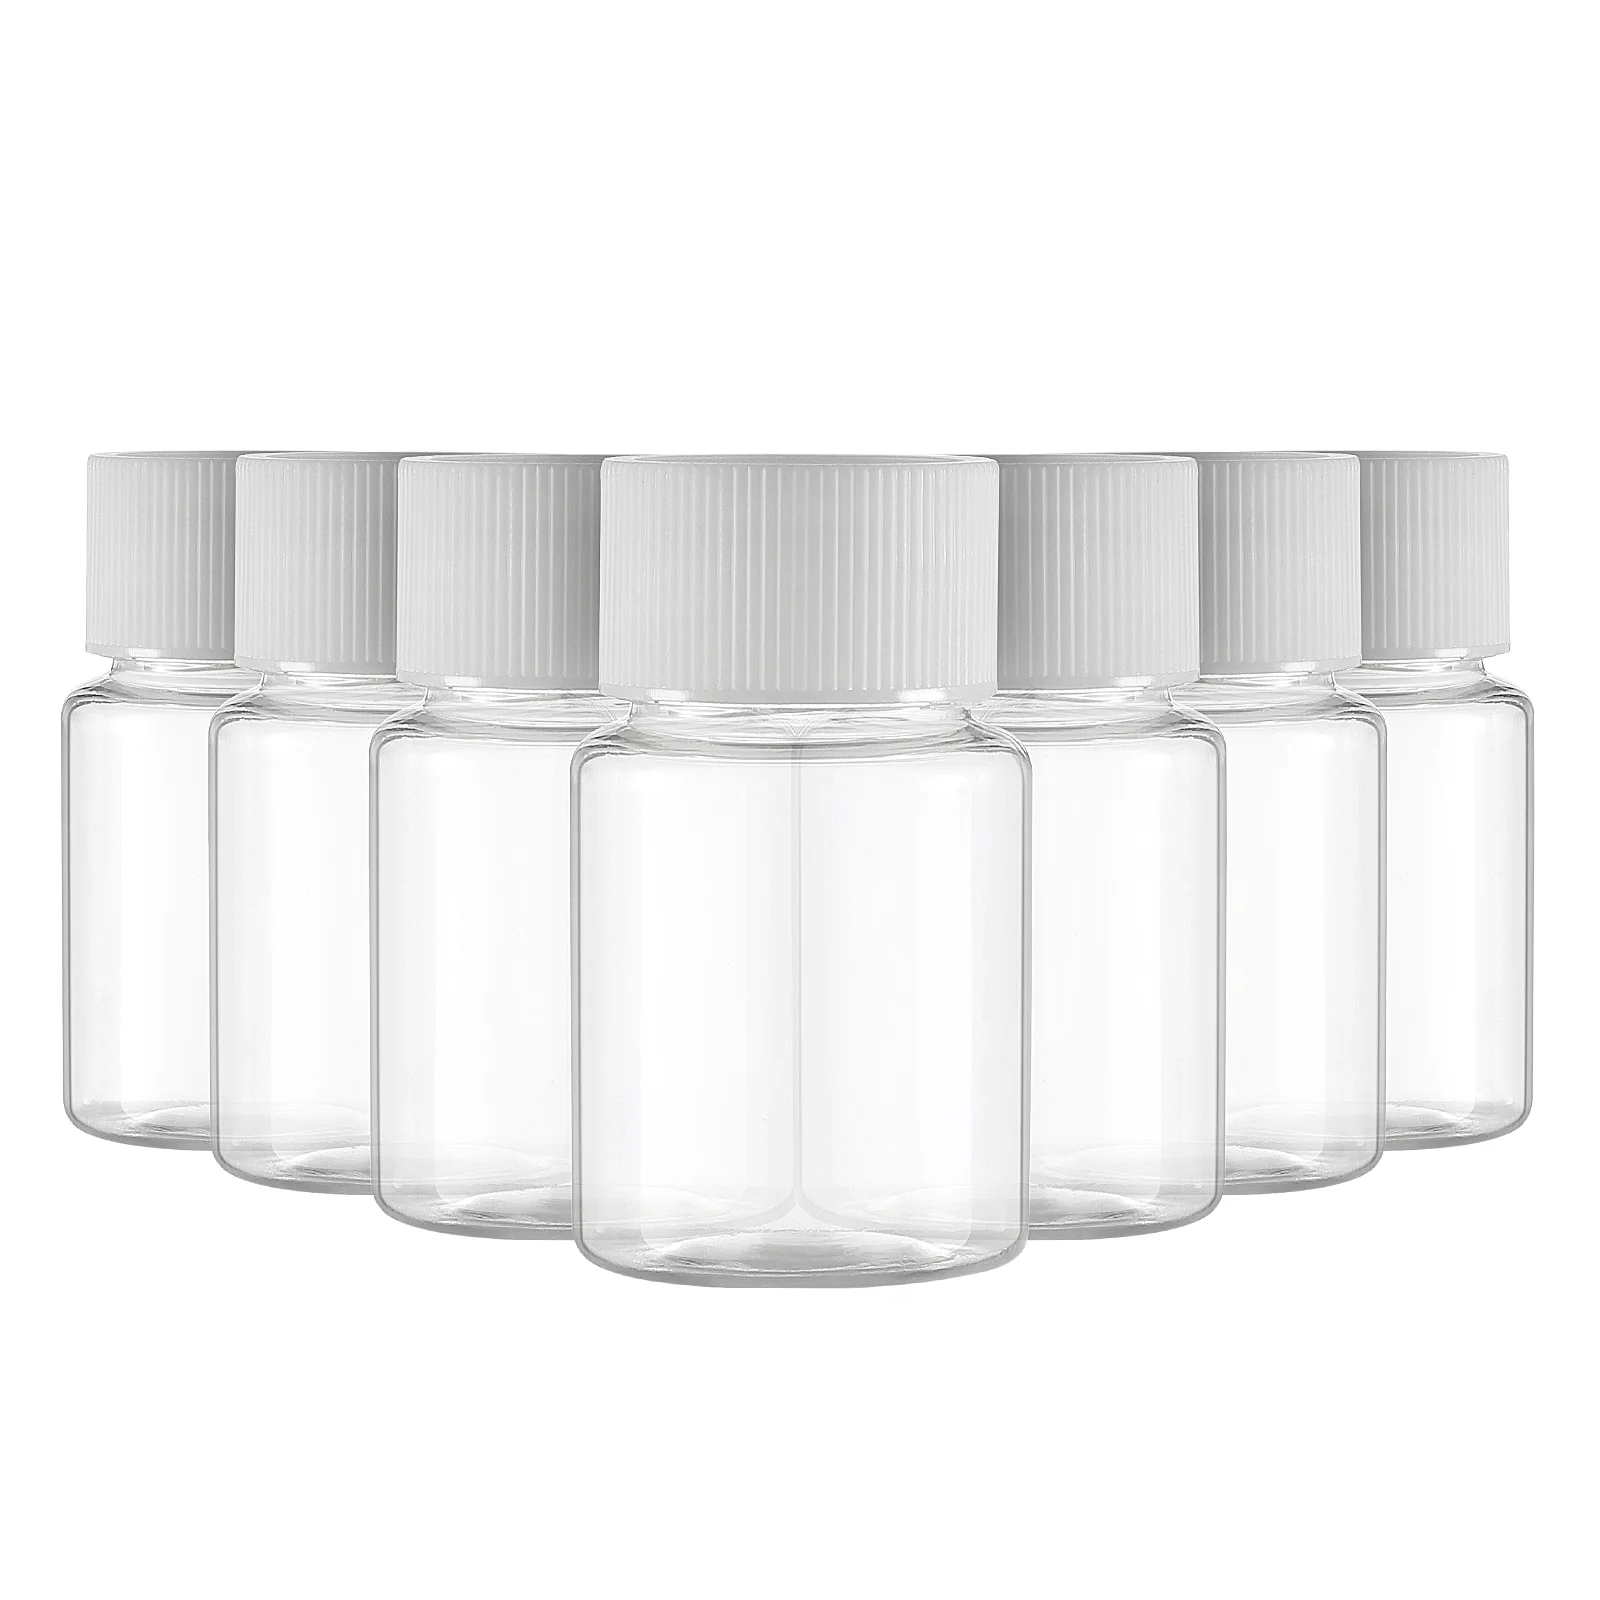 

10pcs Small Plastic Bottles Travel Portable Containers Sample Bottles Plastic Vials with Lids (30ML)